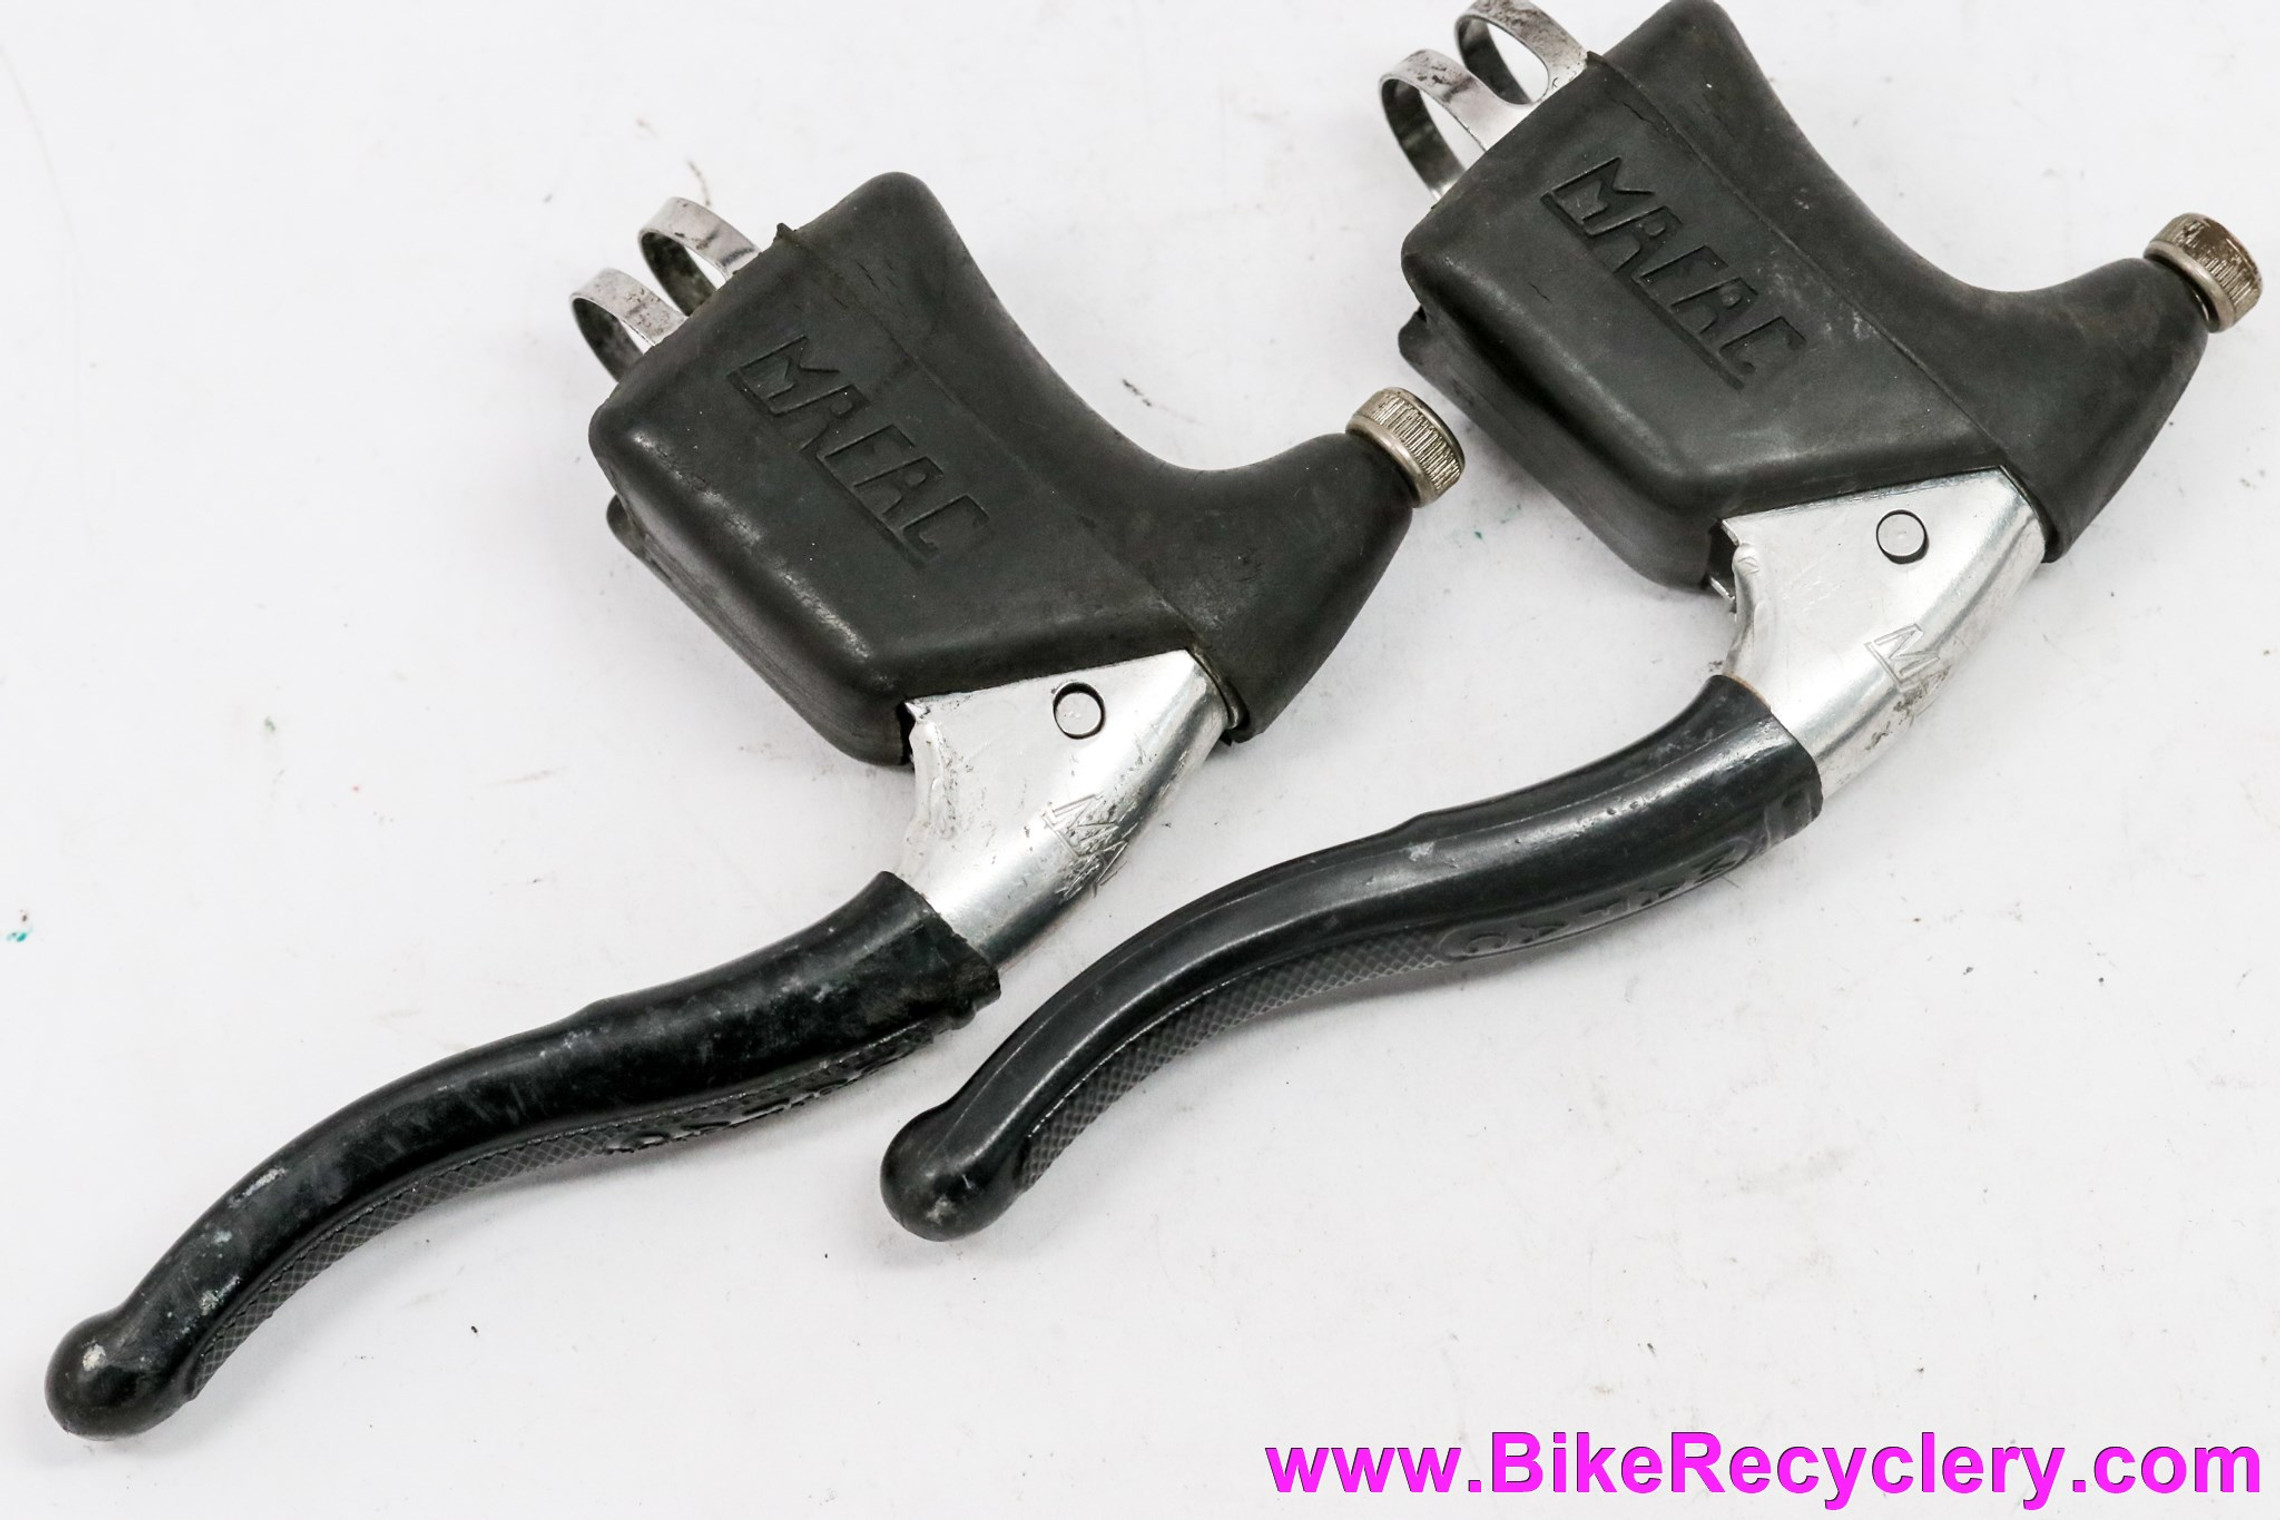 MAFAC 2000 Competition Brake Levers: Full Black Hoods - Blade Covers (EXC)